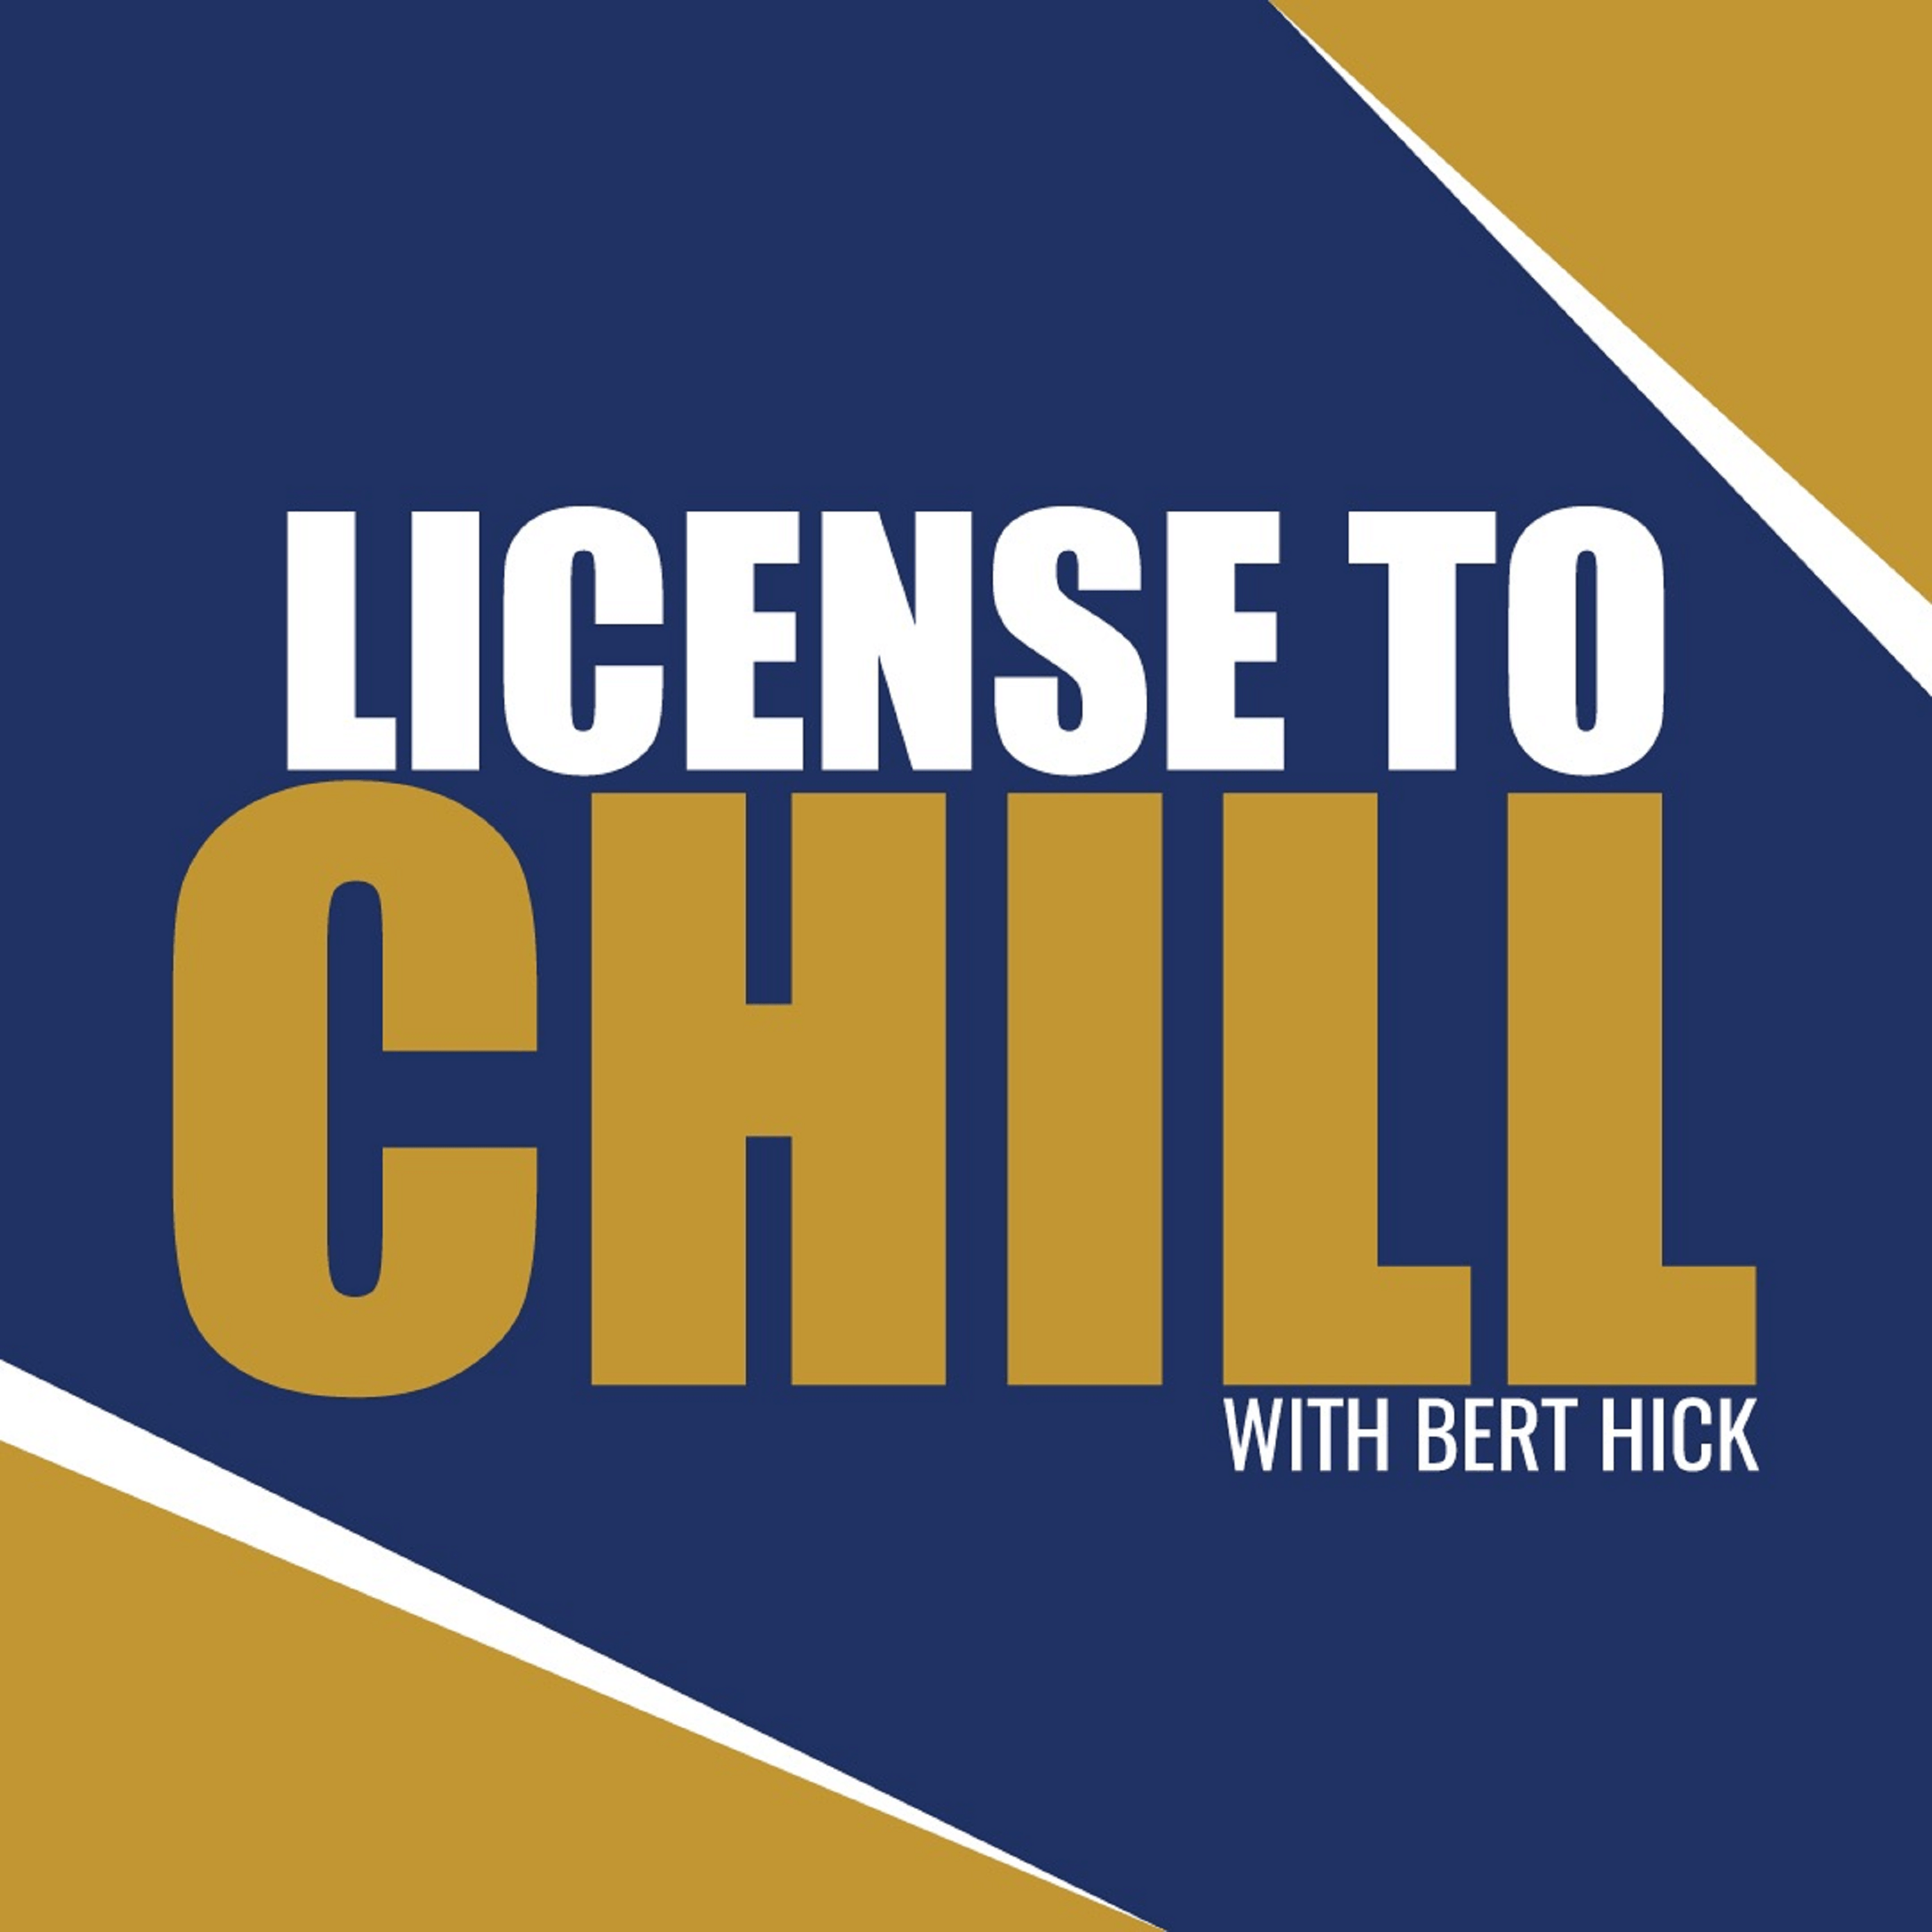 License to Chill – Latest Cannabis News Today – Headlines, Videos & Stocks